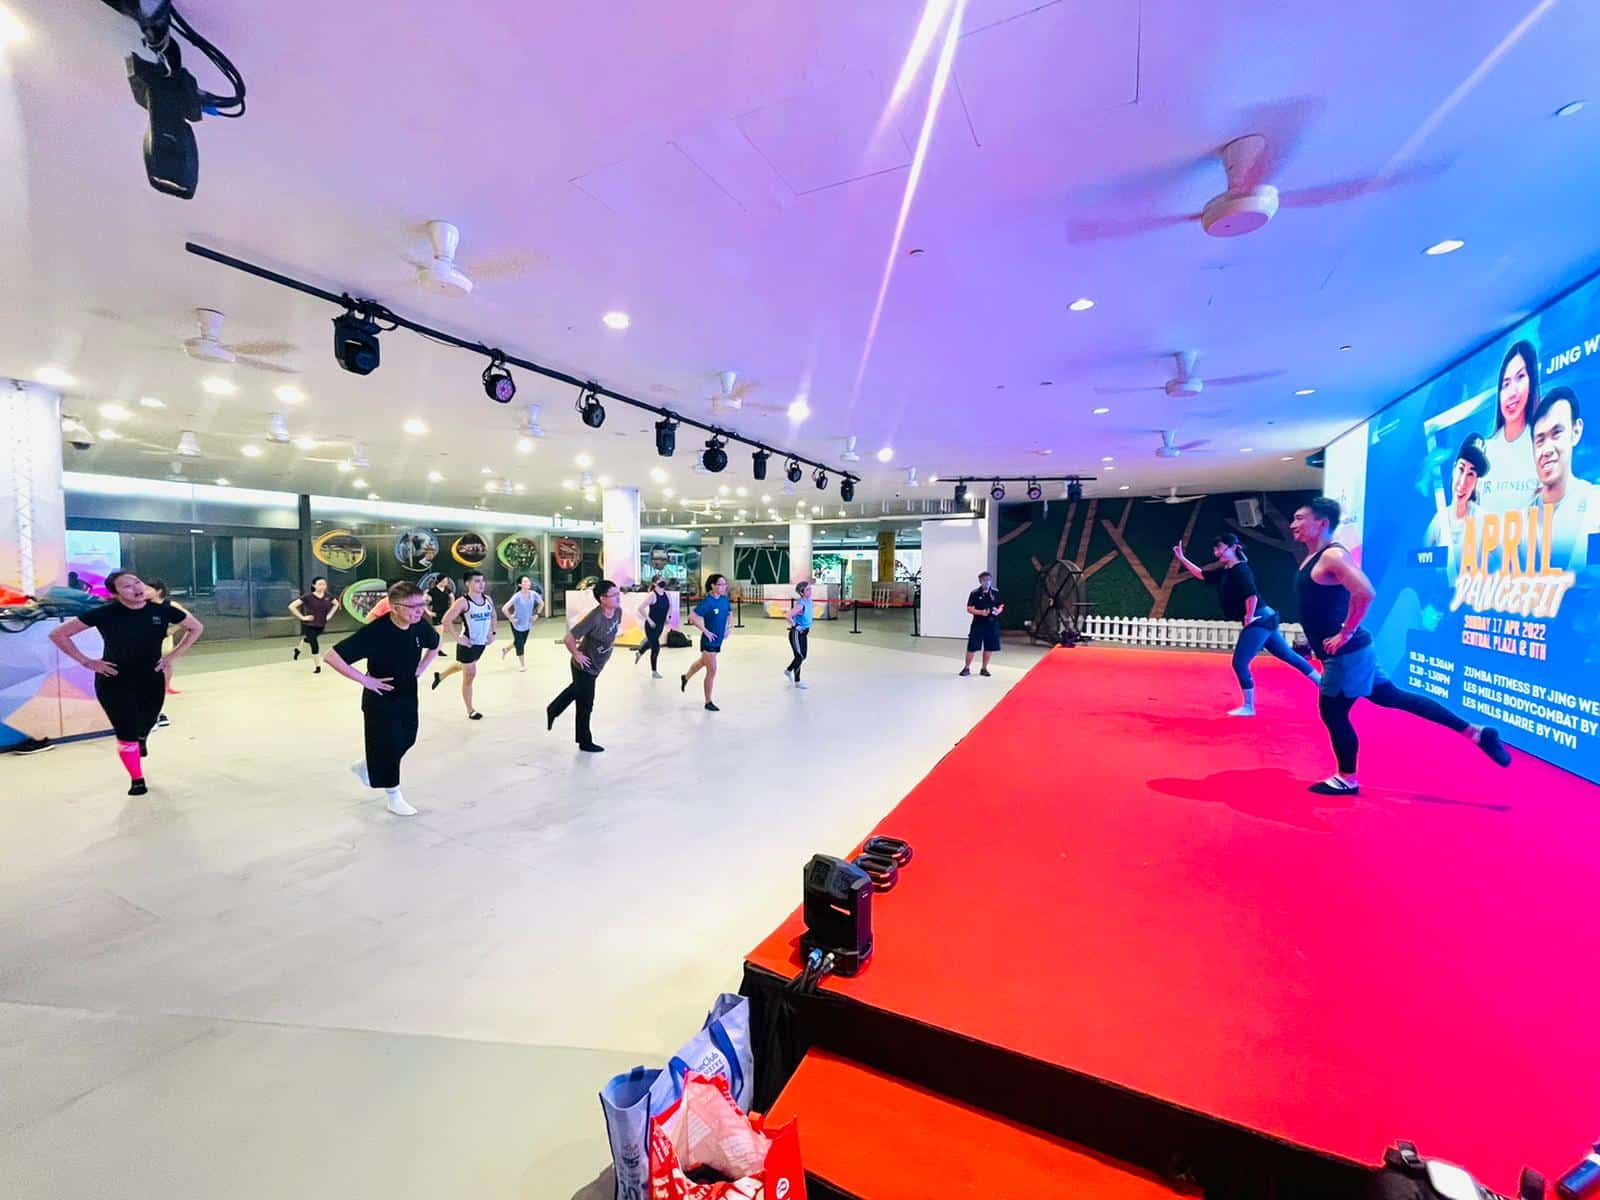 Our Tampines Hub Fitness